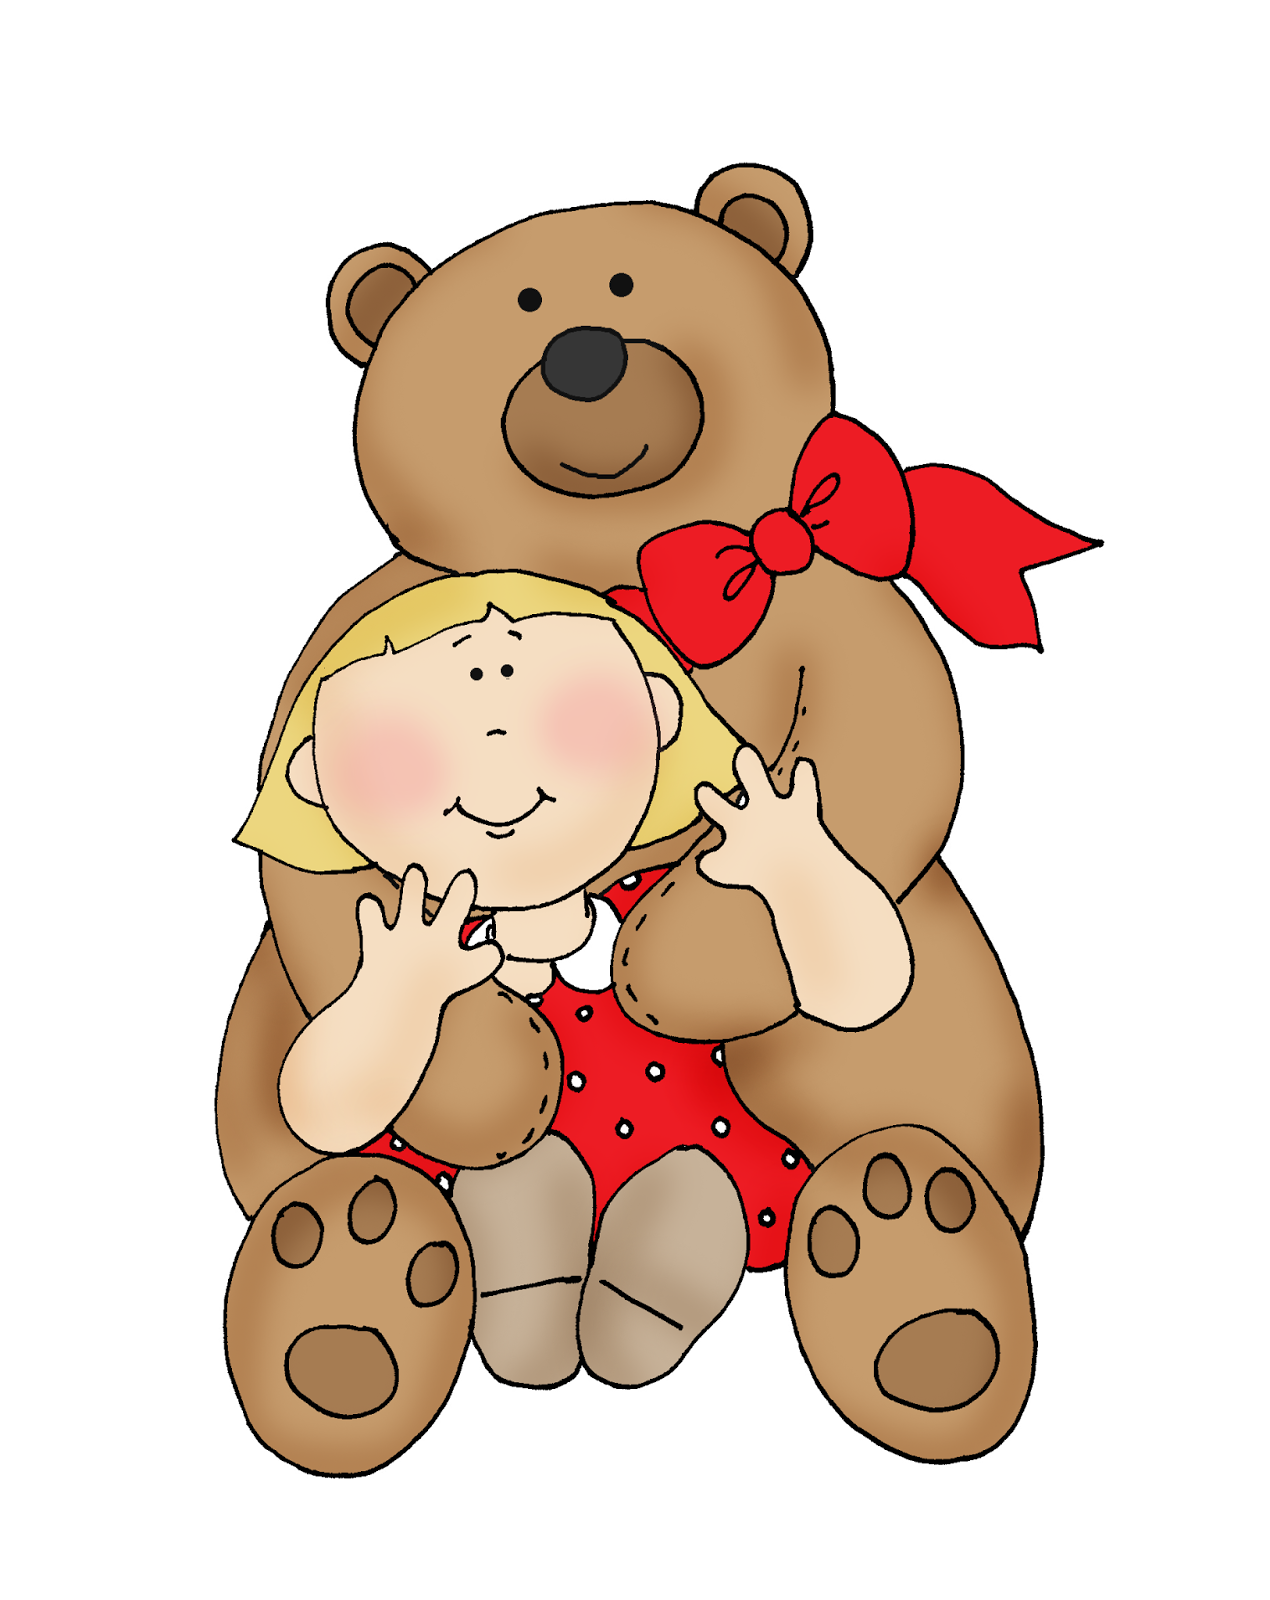 Digi stamps, Teddy bears and Dolls on Pinterest